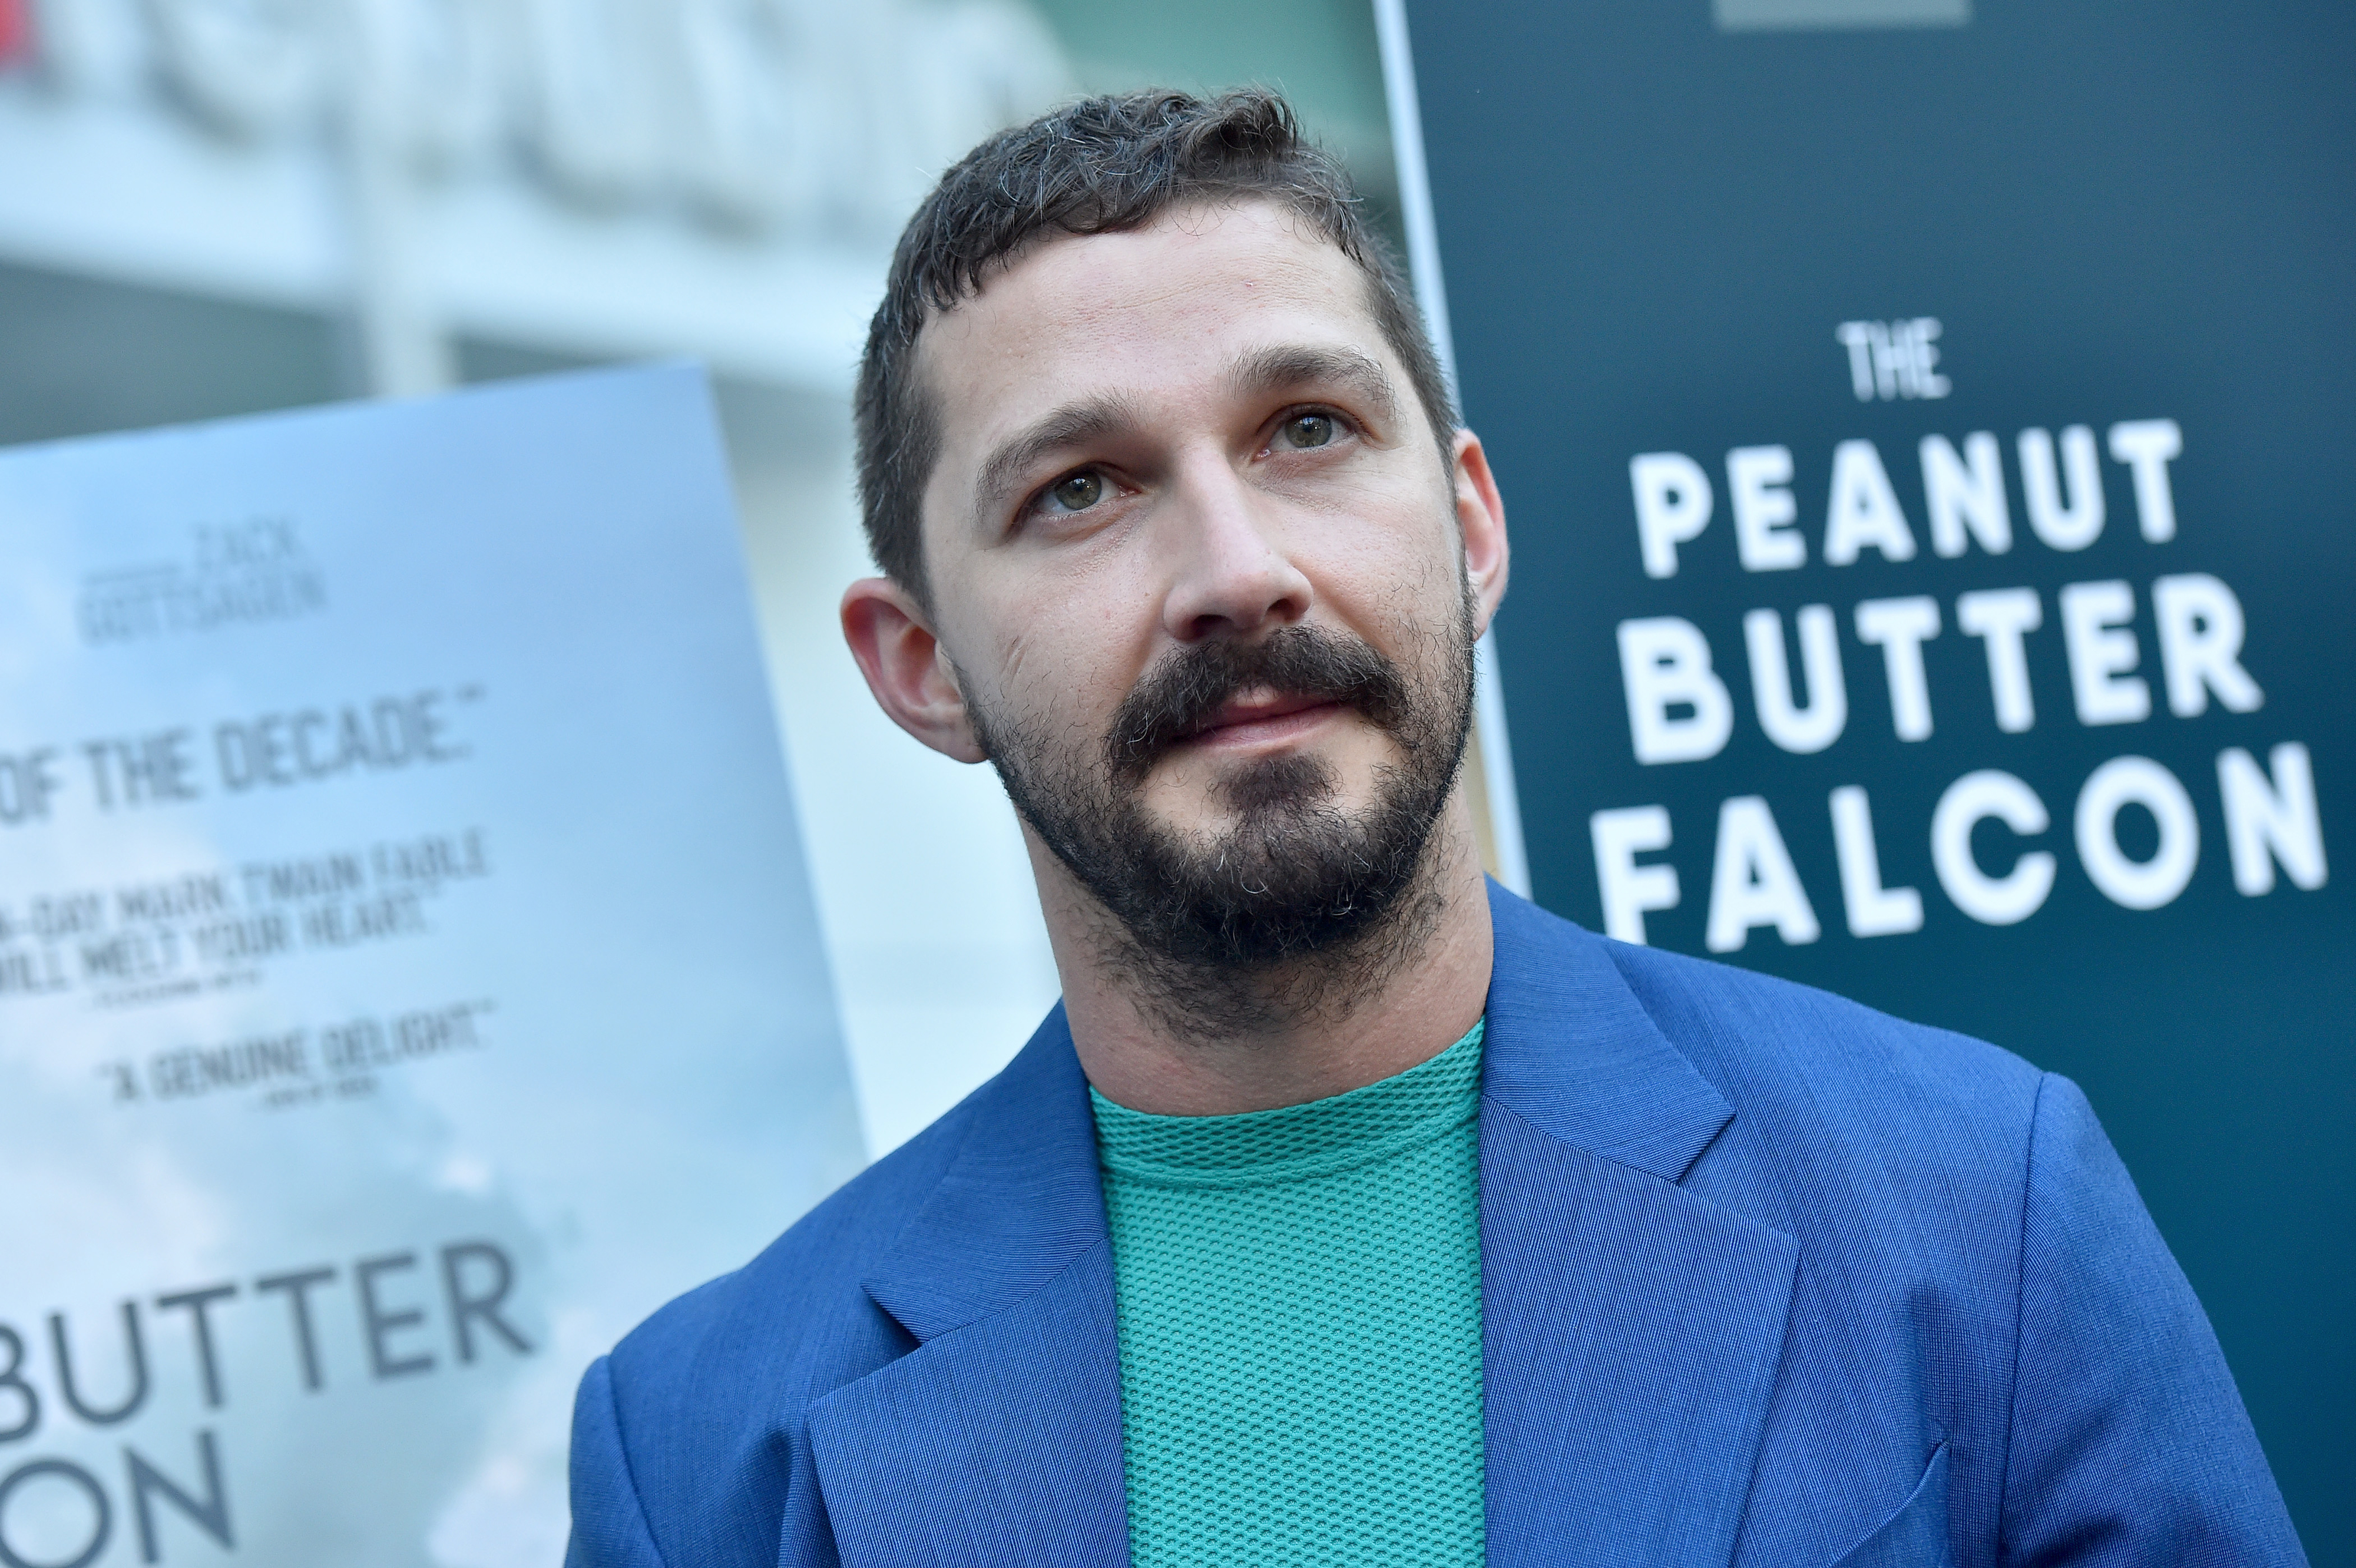 Shia LaBeouf in a blue suit without a tie at &quot;The Peanut Butter Falcon&quot; premiere